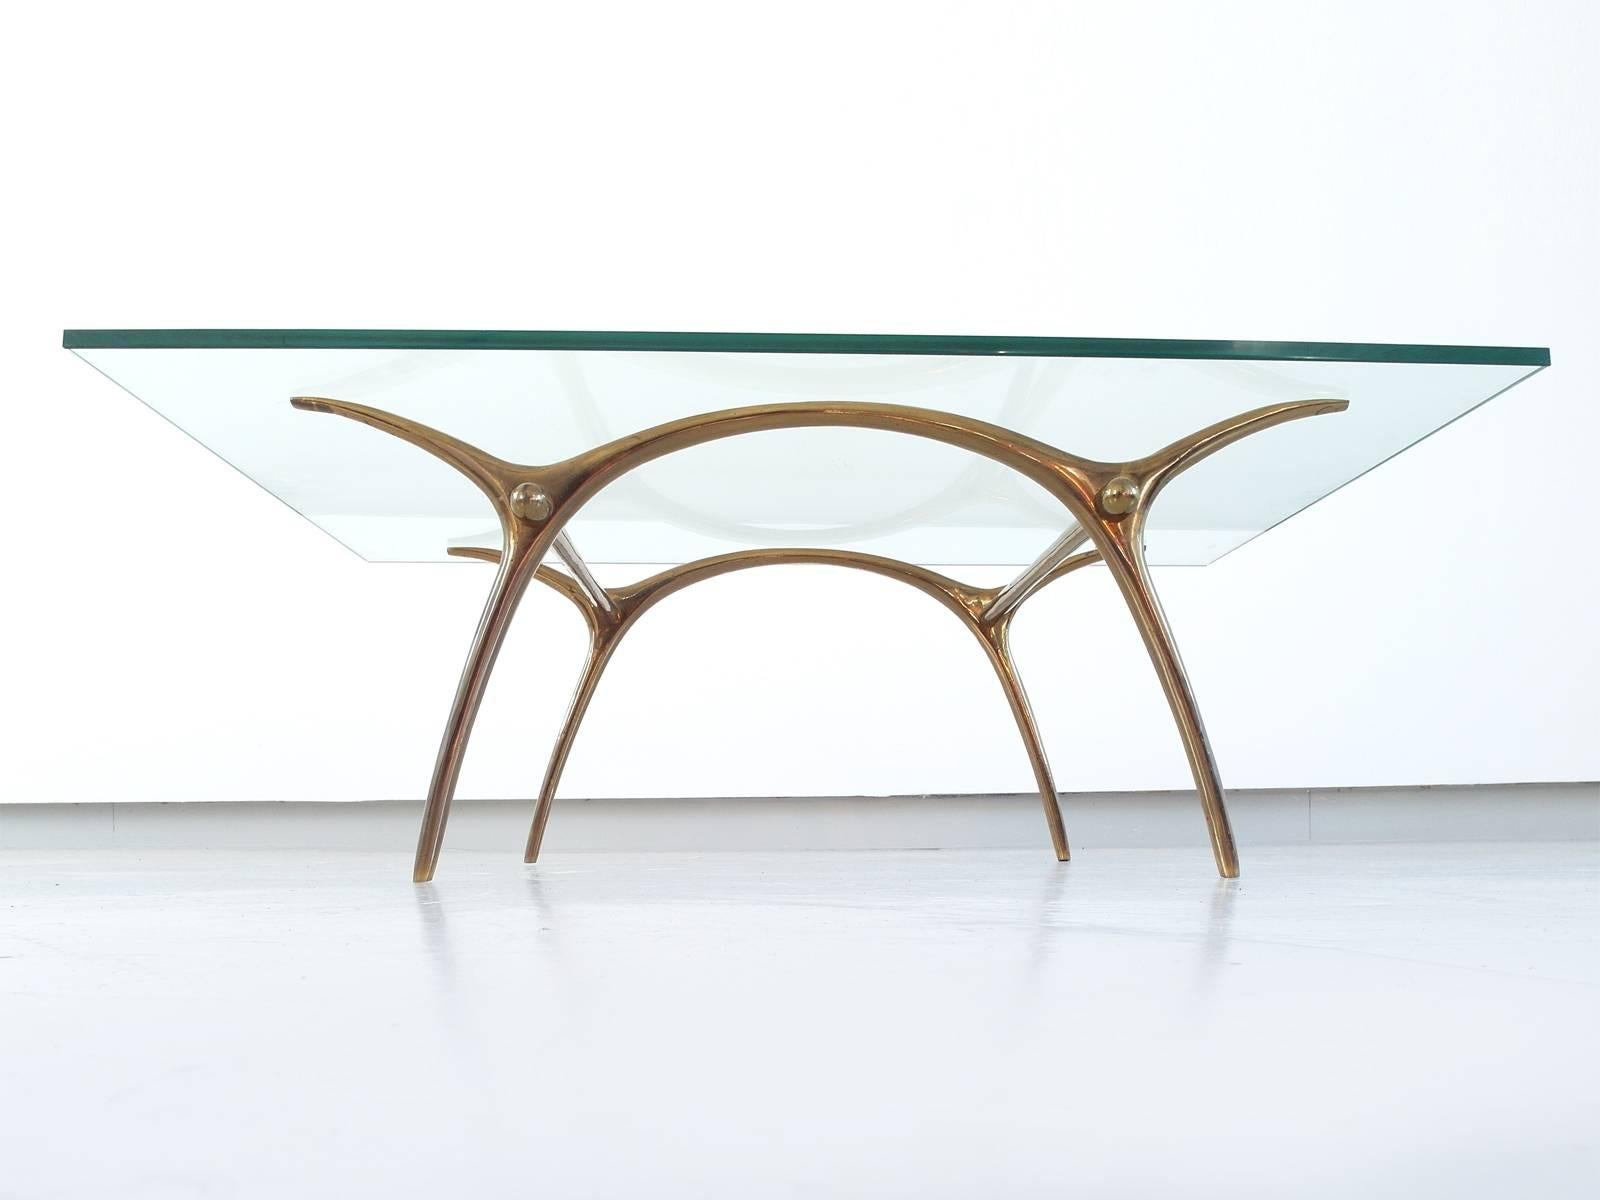 A bronze and glass coffee table designed by Kouloufi for Ets Vanderborght Frères SA, Brussels 1958. Vanderborght Frères was a Brussels-based interior company, similar to Maison Janssen or Maison Baguès. This high quality rectangular coffee table